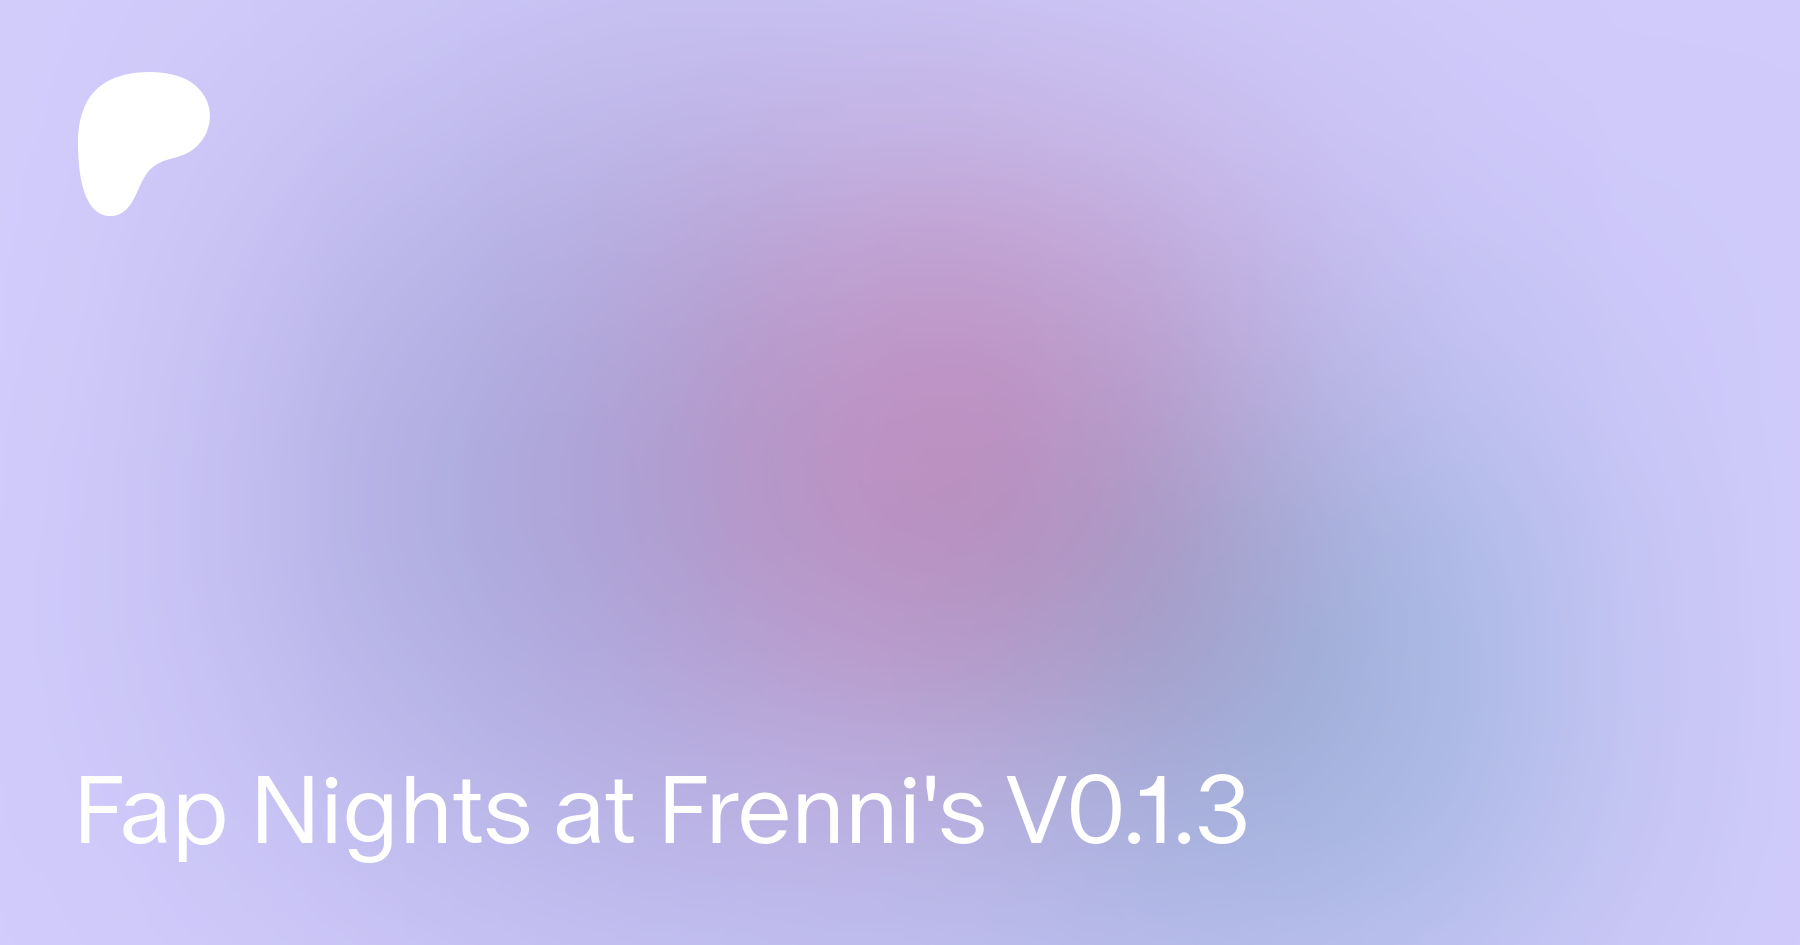 fap nights at frenni APK for Android Download